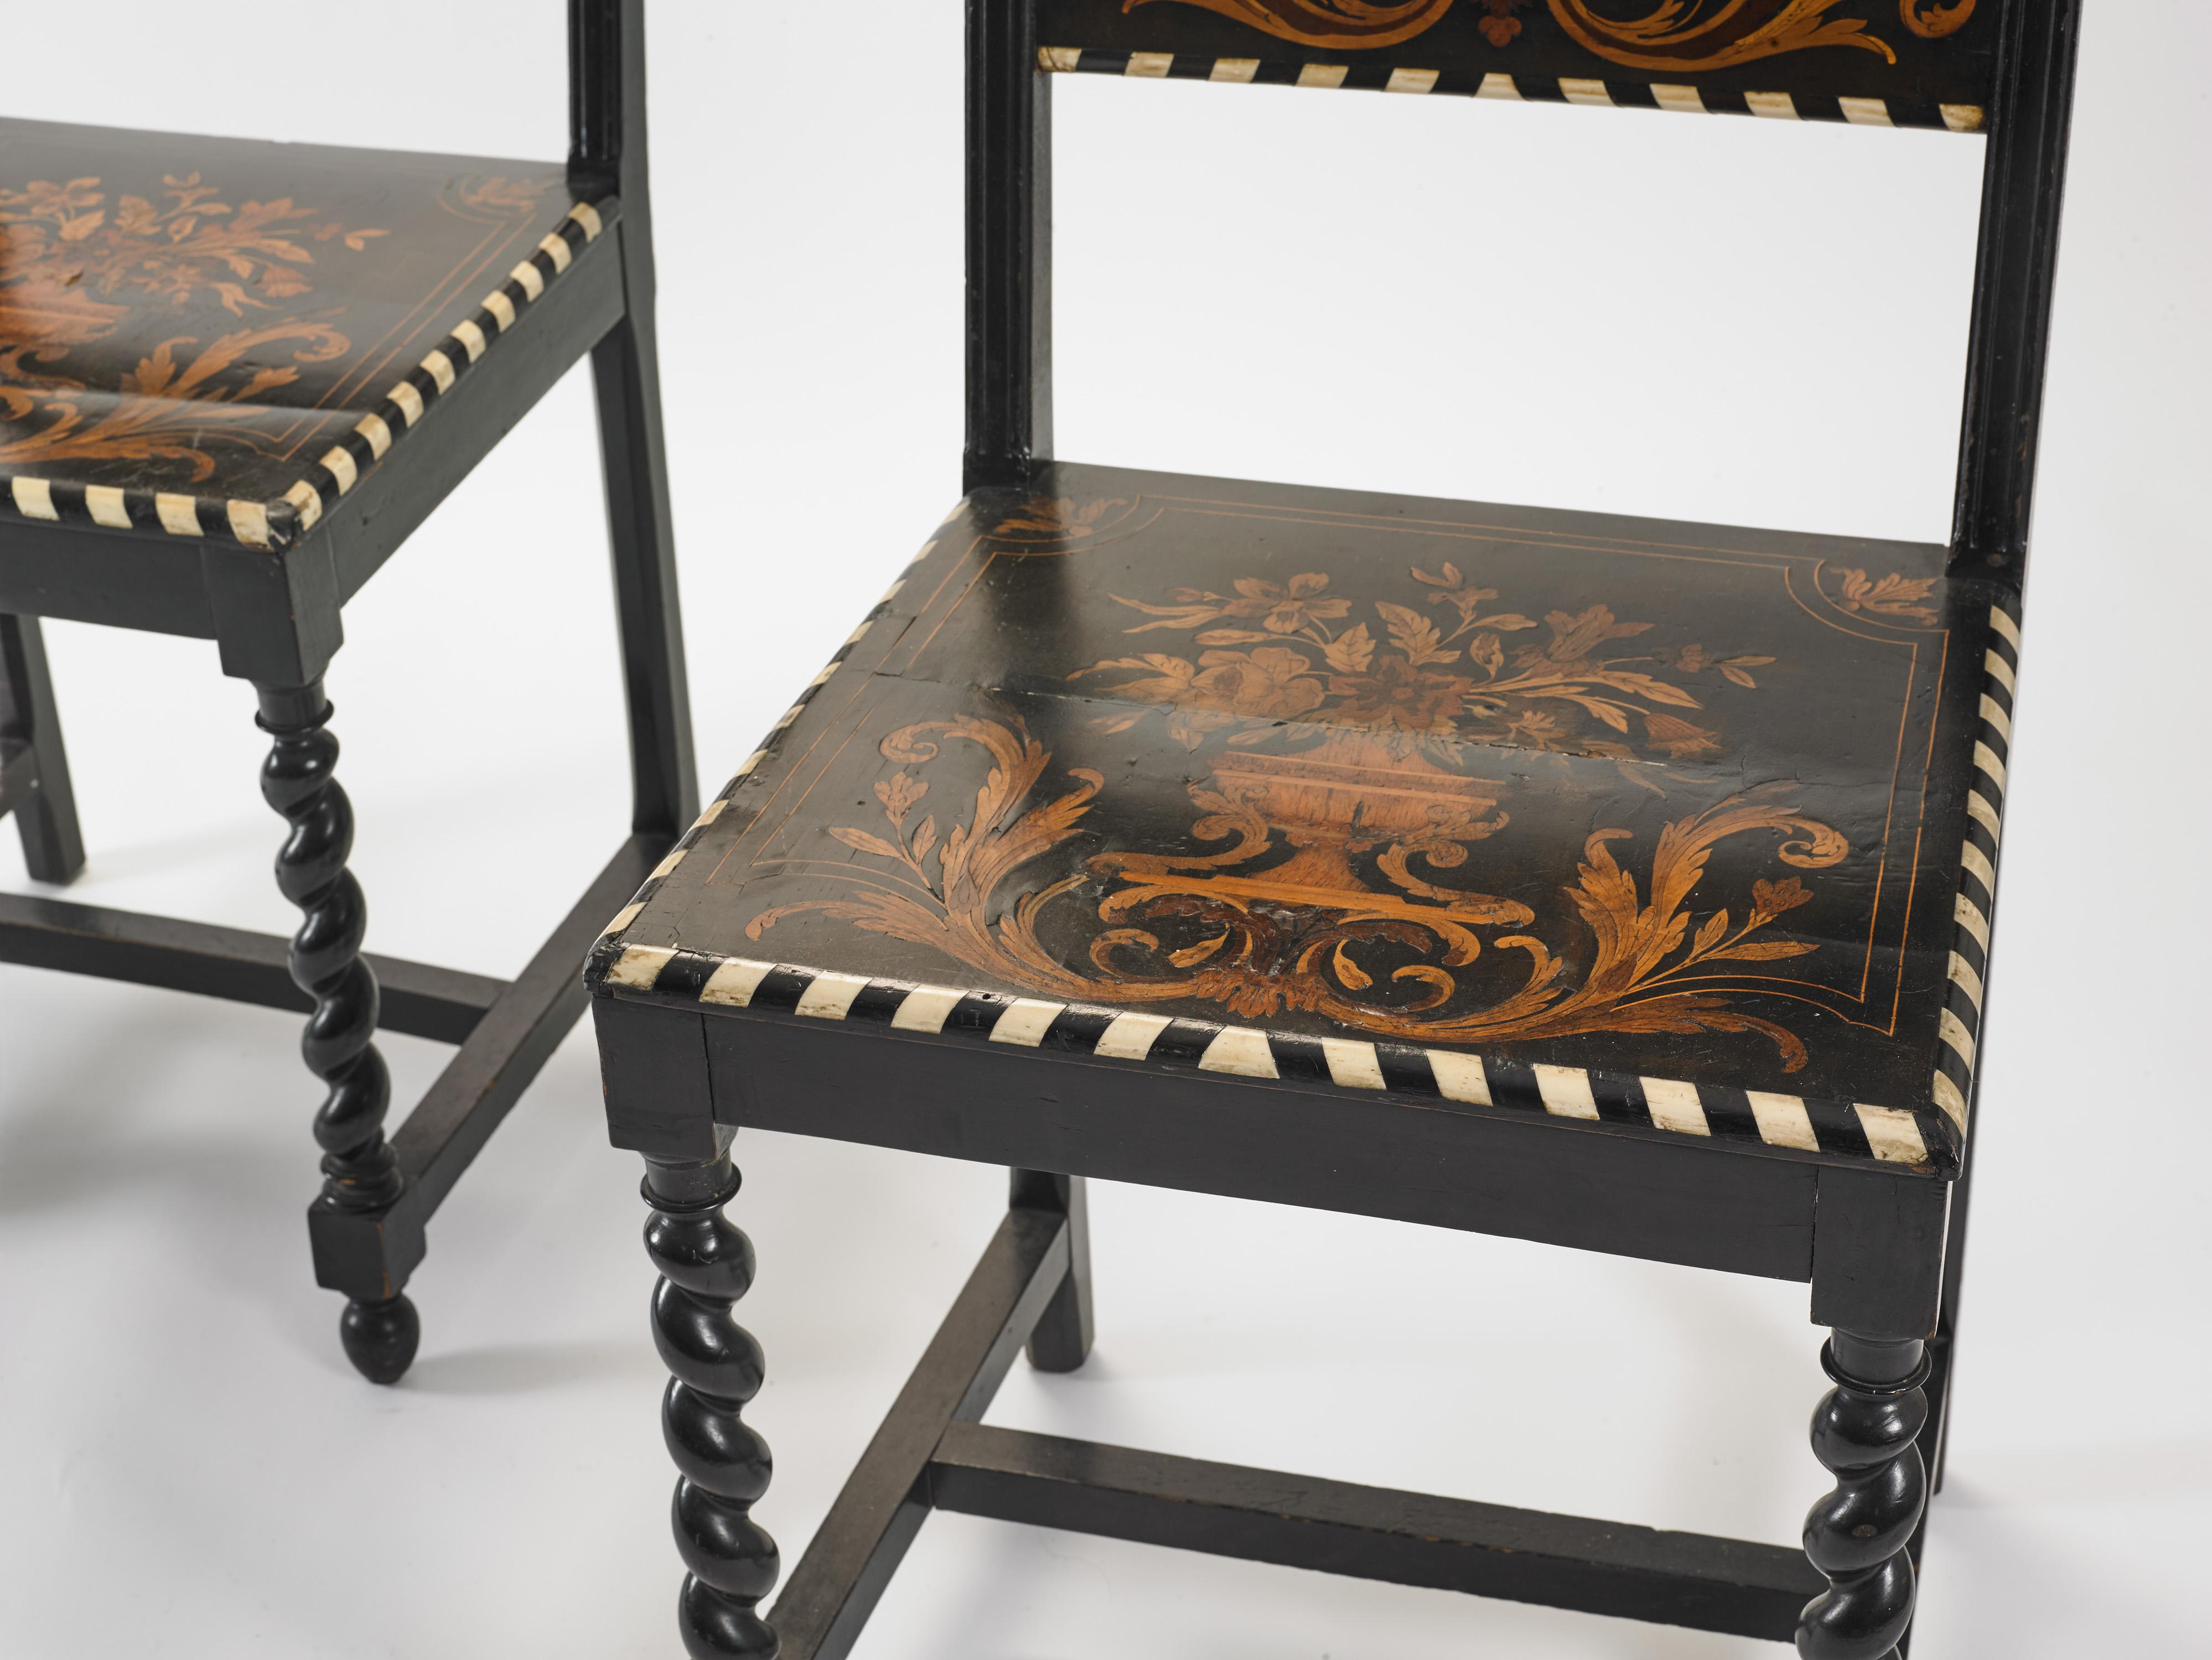 Italian black inlaid chairs, supported by carved spiral legs, and embellished with bone in the edges and light wood marquetry depicting floral motifs.
Turn of the century Italian renaissance style.
Good condition consistent with age and wear.